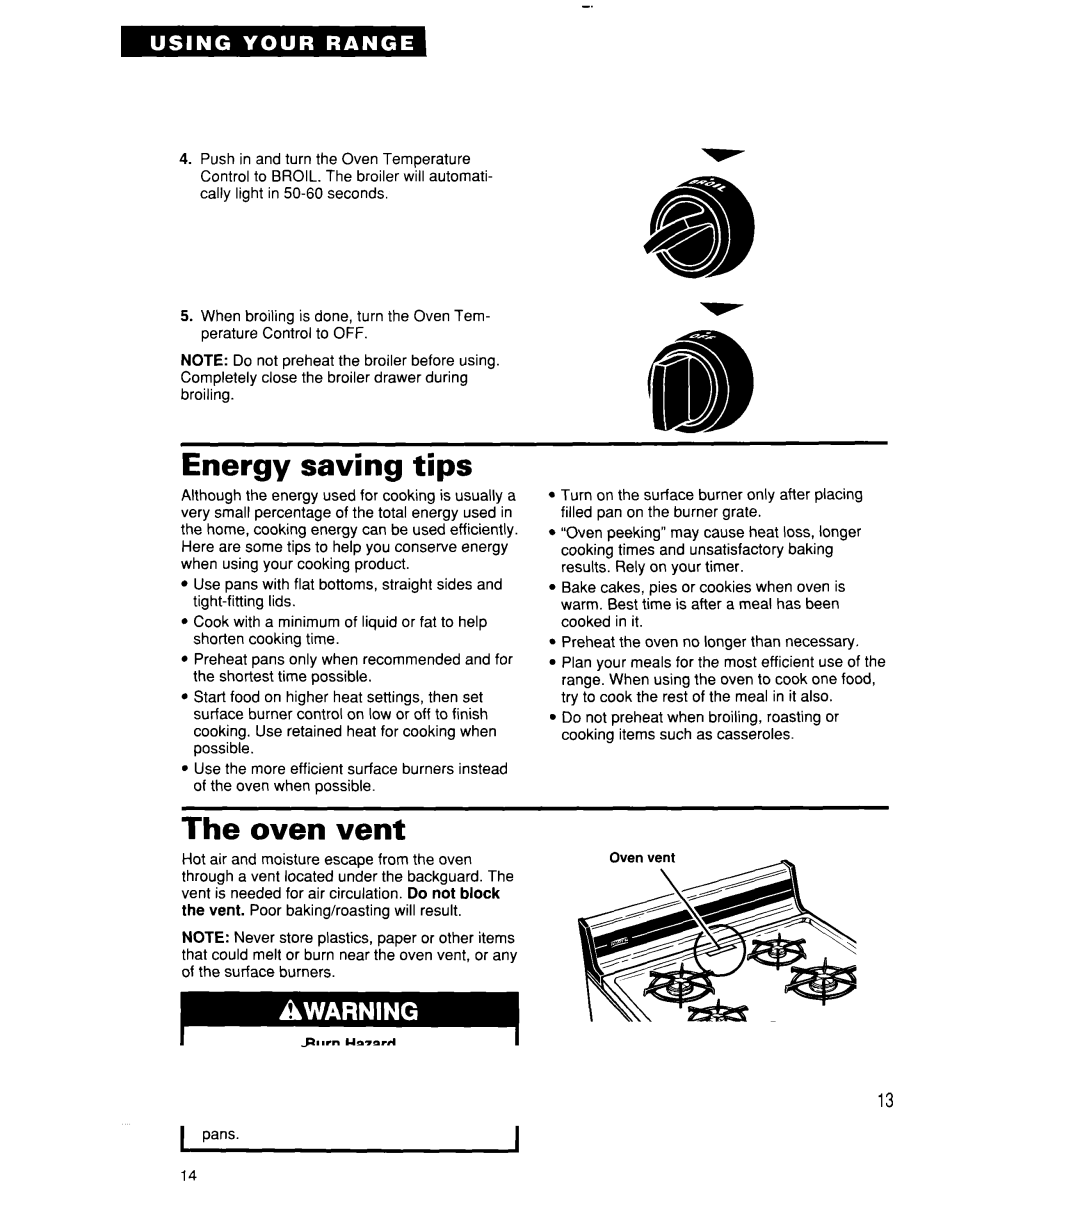 Roper FGP315Y, FLP310Y, FGP320Y, FGP310Y, FGP325Y important safety instructions Energy saving tips, Oven vent 